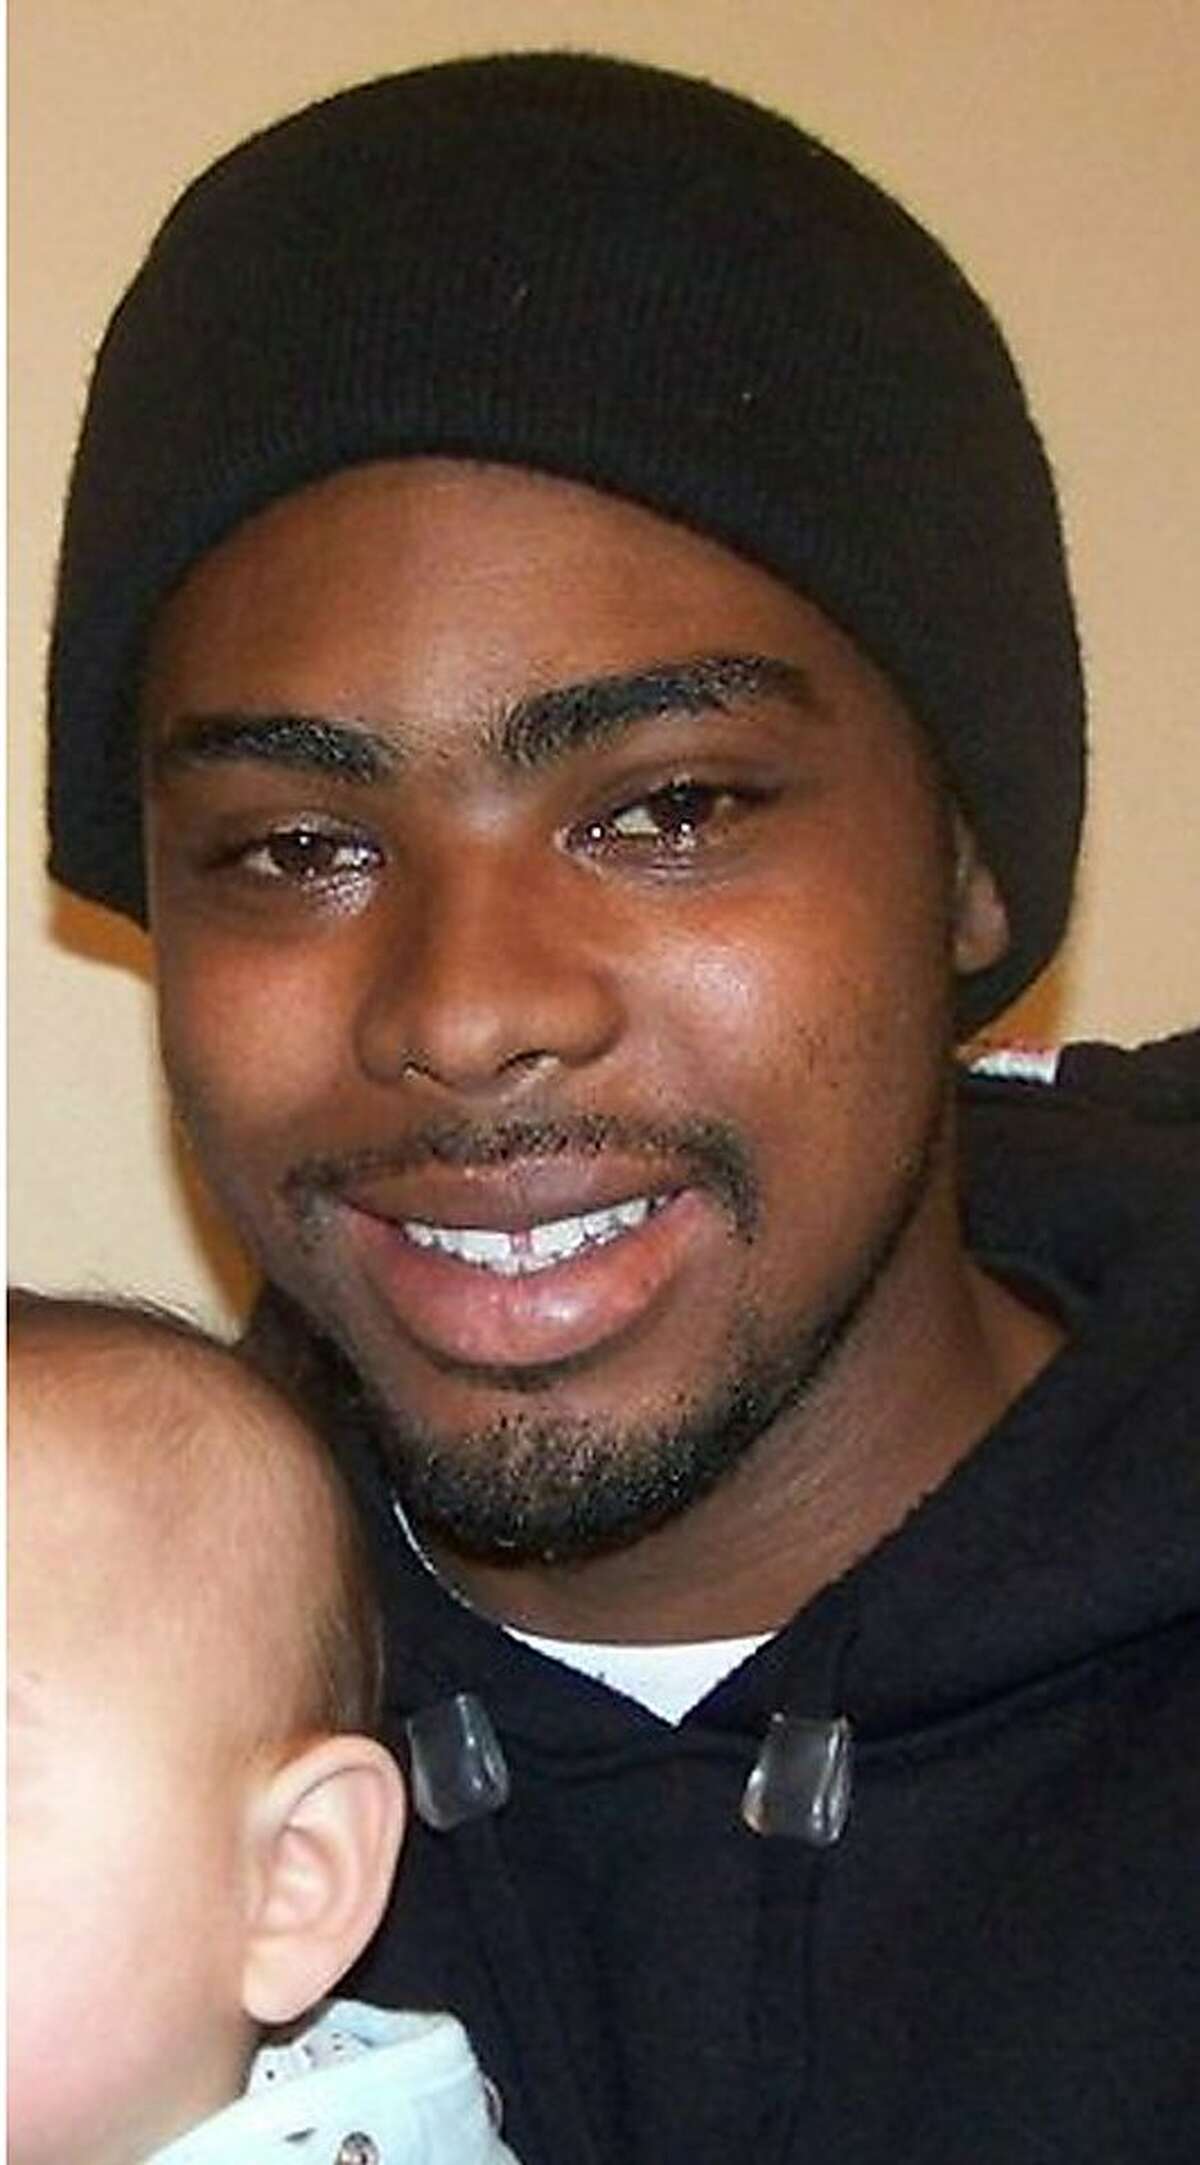 Oscar Grant, a 22-year-old transit rider who was shot and killed by Bay Area Rapid Transit police on New Year's Day 2009.